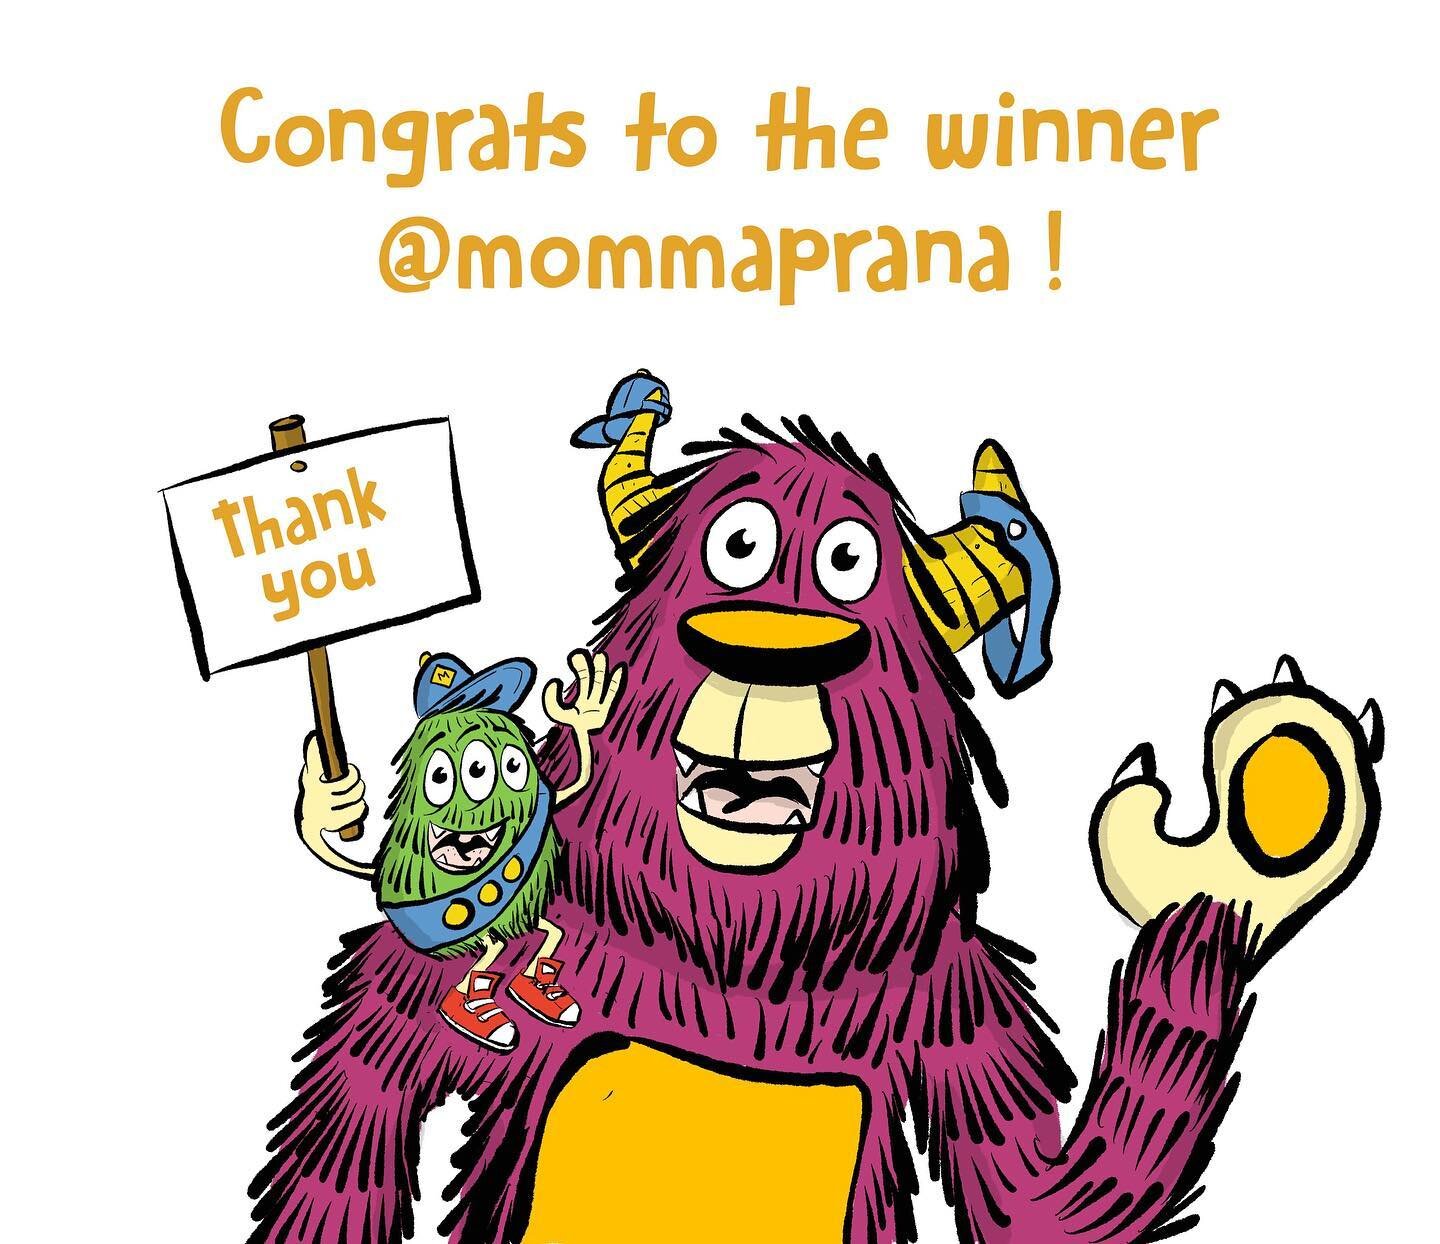 Congrats to our winner, @mommaprana!! 

Thanks so much to @tinkertotsboxes for rallying some great brands and making this one fun week! Larry and the gang made A TON of new friends and are ready to catch up on some sleep after all the excitement. Tha